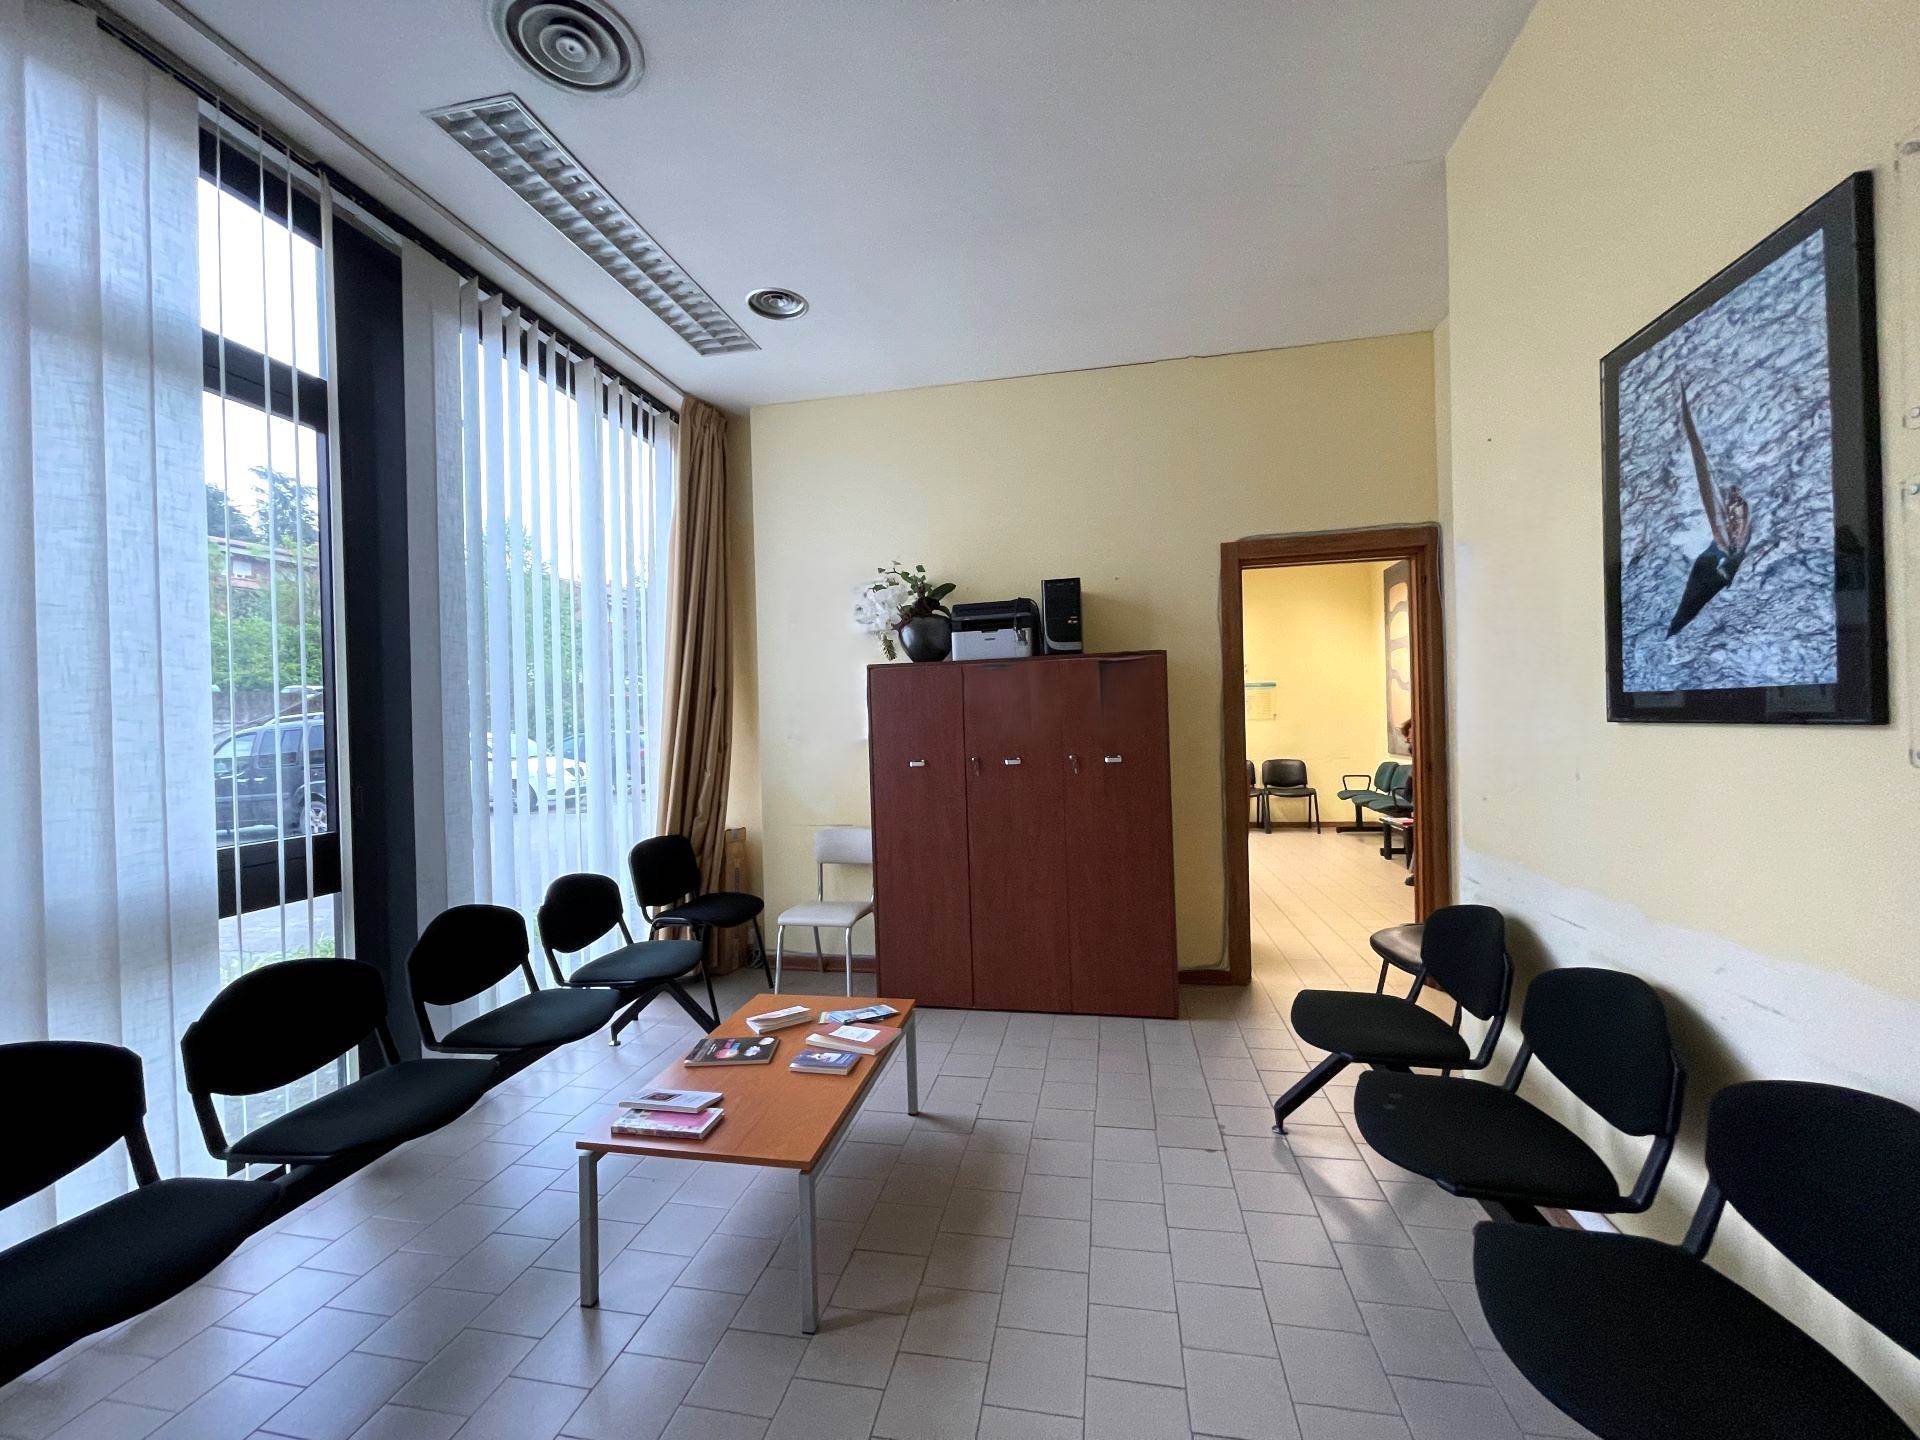 In the northern area near the city and the Siena-Florence connection, 250 m2 office with various rooms and 3 bathrooms. Ideal for a large medical practice as it is already used for this purpose or 